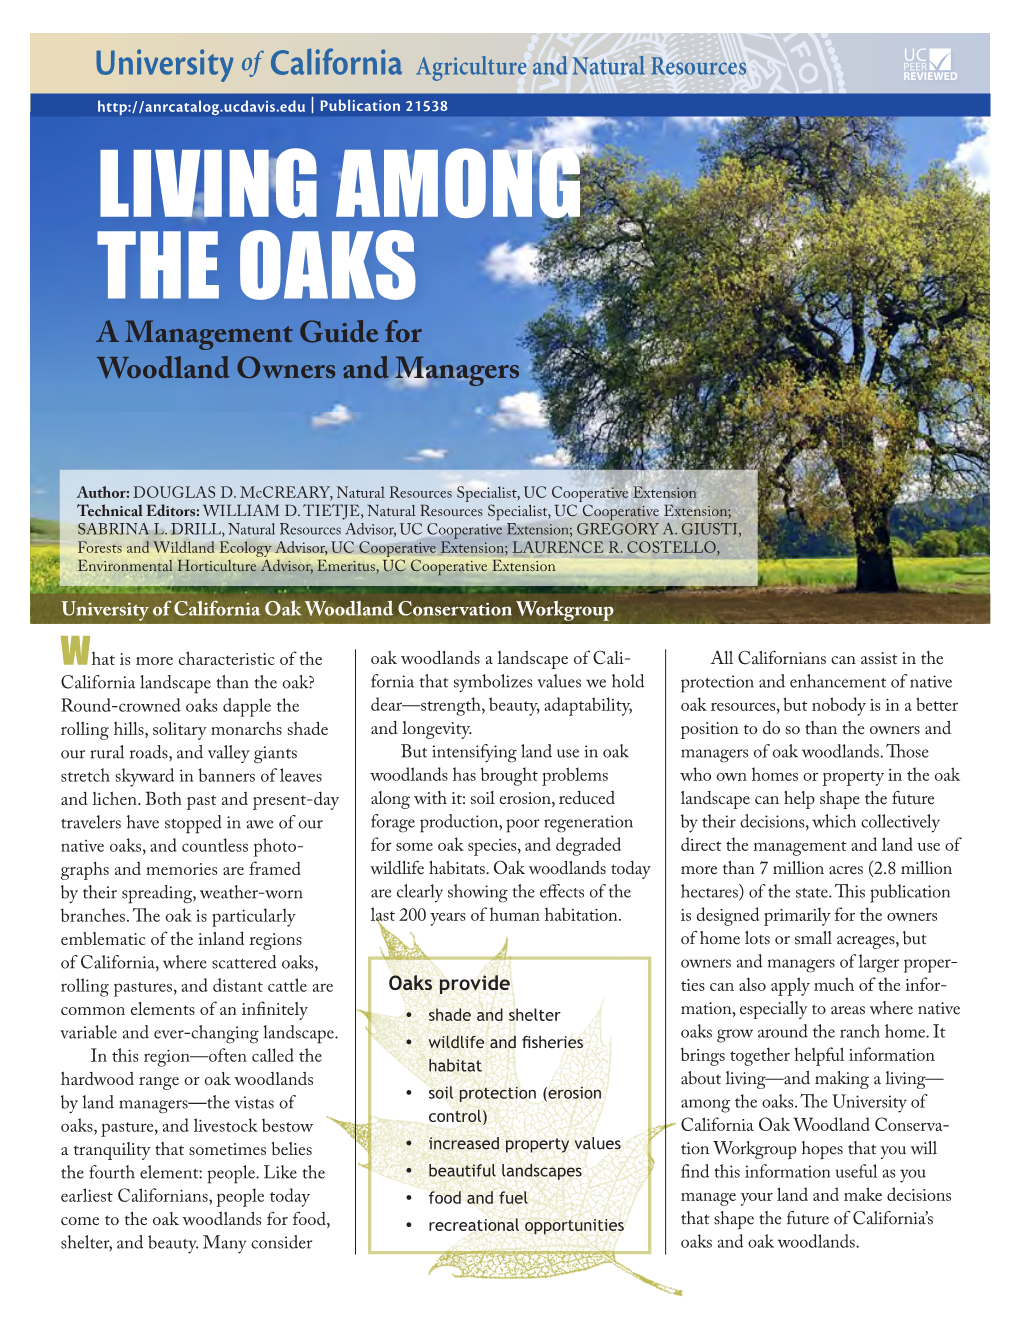 LIVING AMONG the OAKS a Management Guide for Woodland Owners and Managers